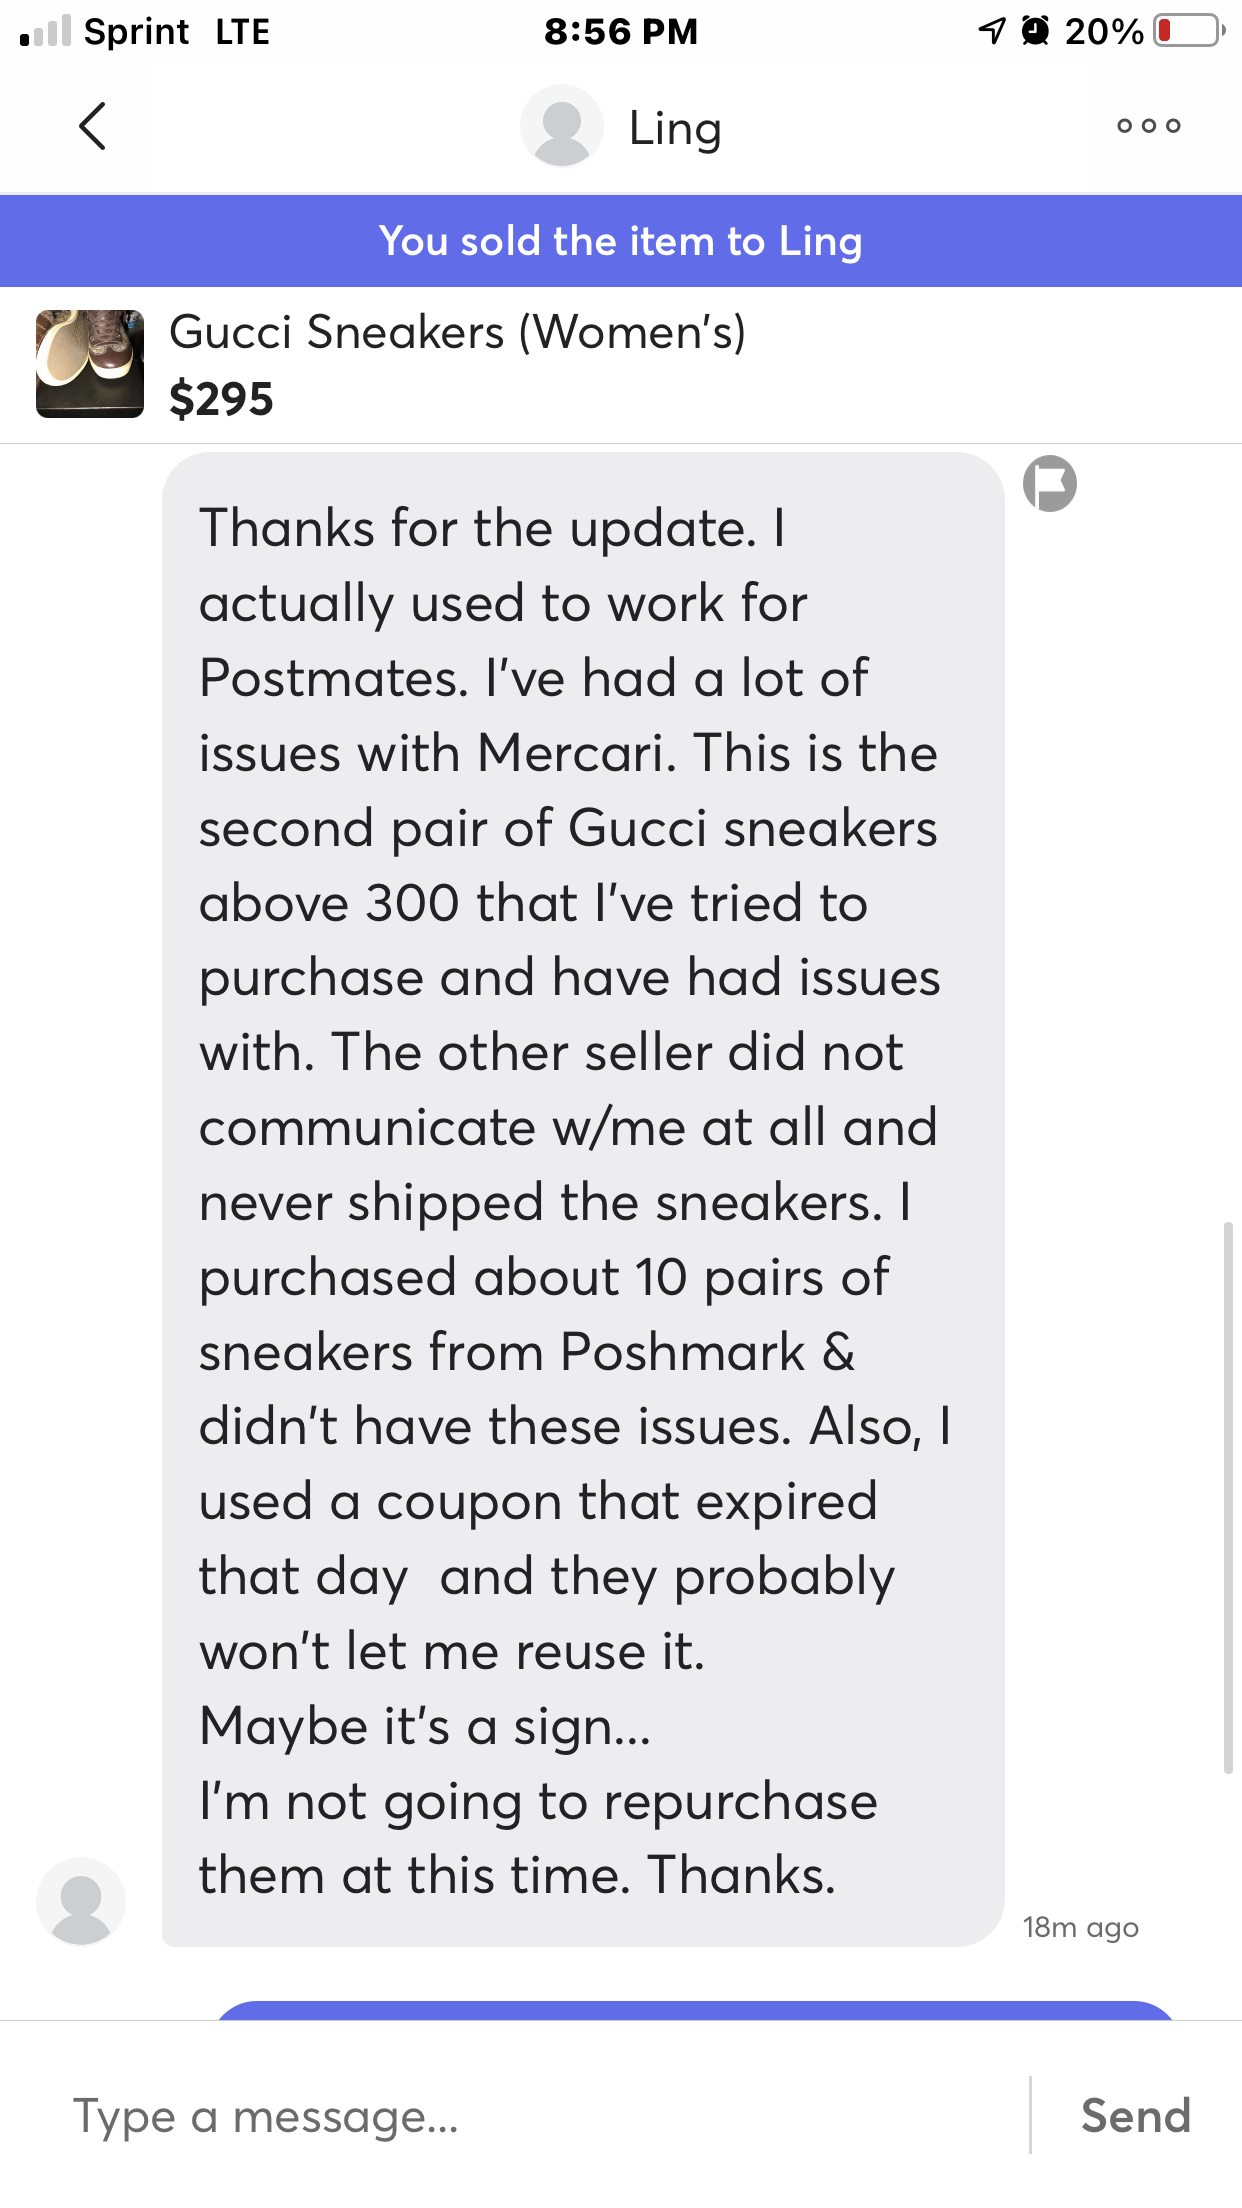 Mercari complaint Mercari’s third party post mate pickup service fid not pickup my package although it is marked that the package was delivered.